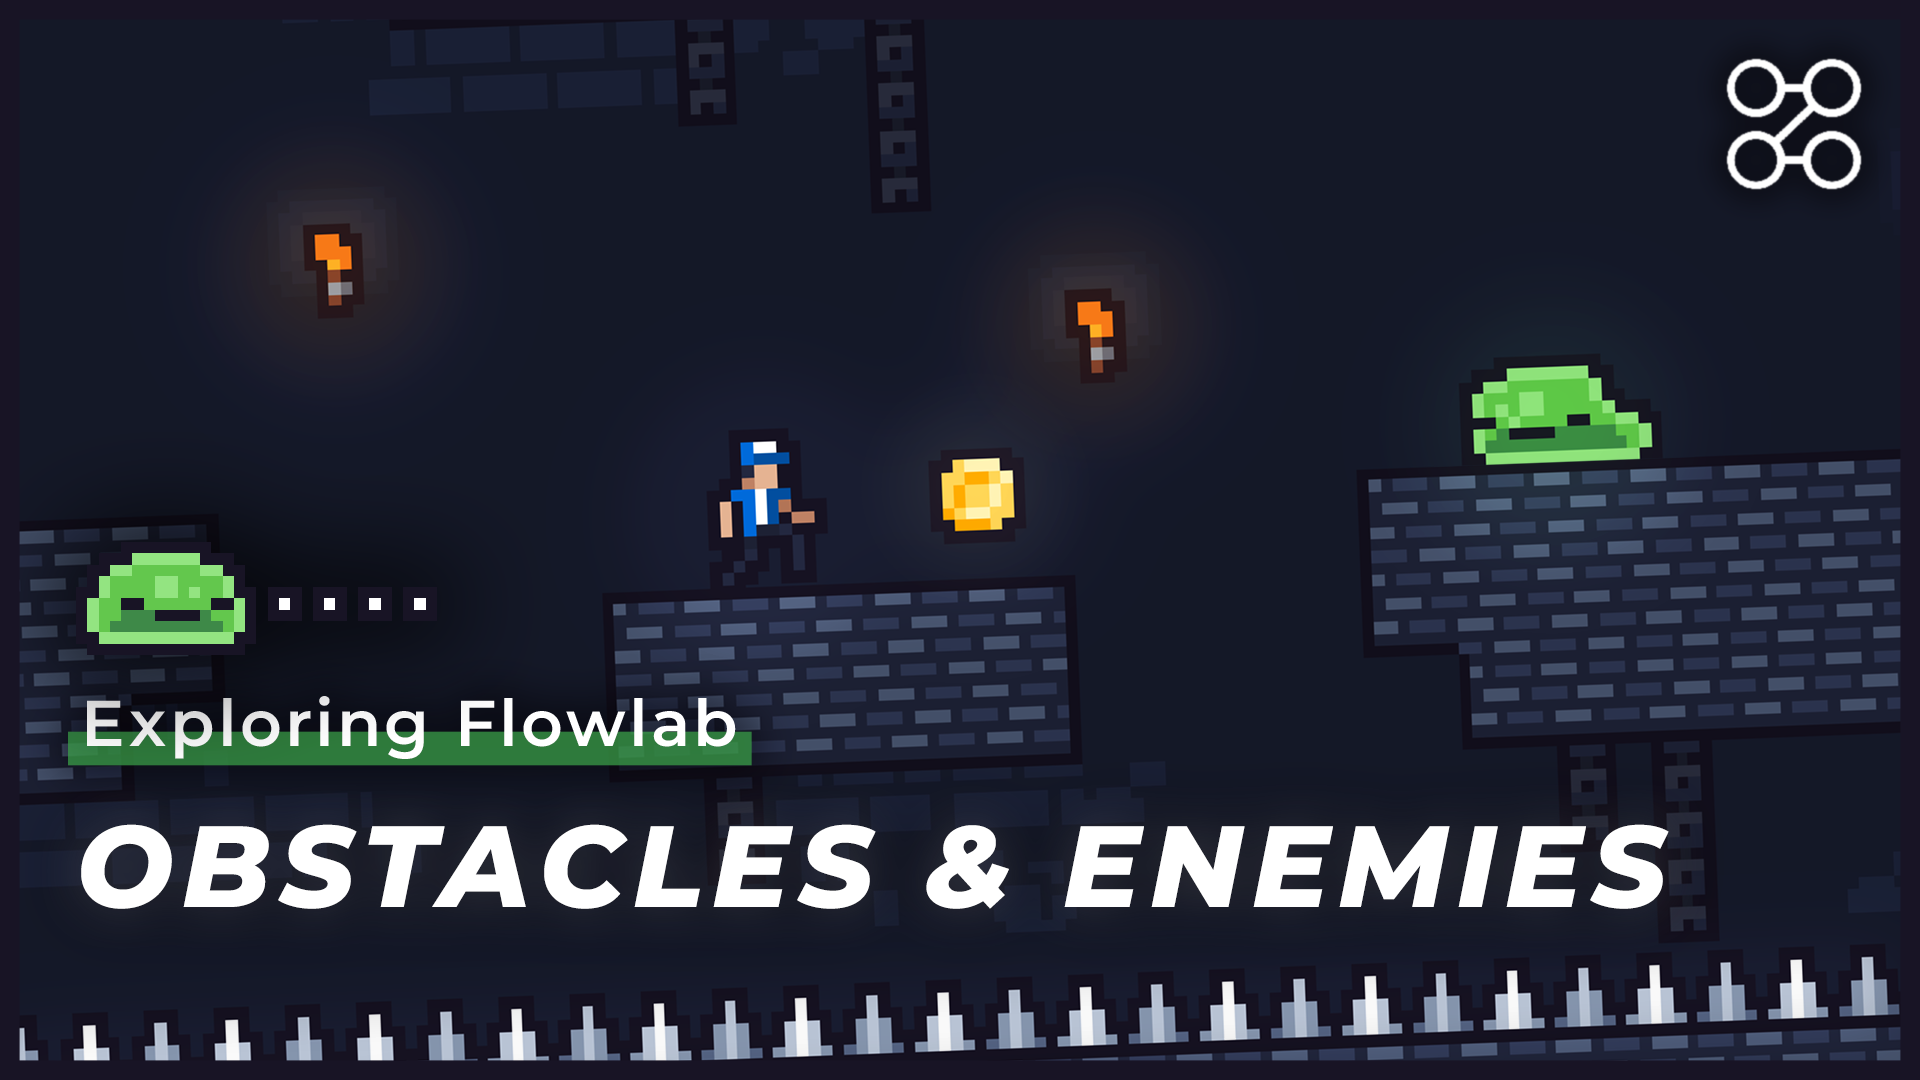 Make your first game with Flowlab, part 1